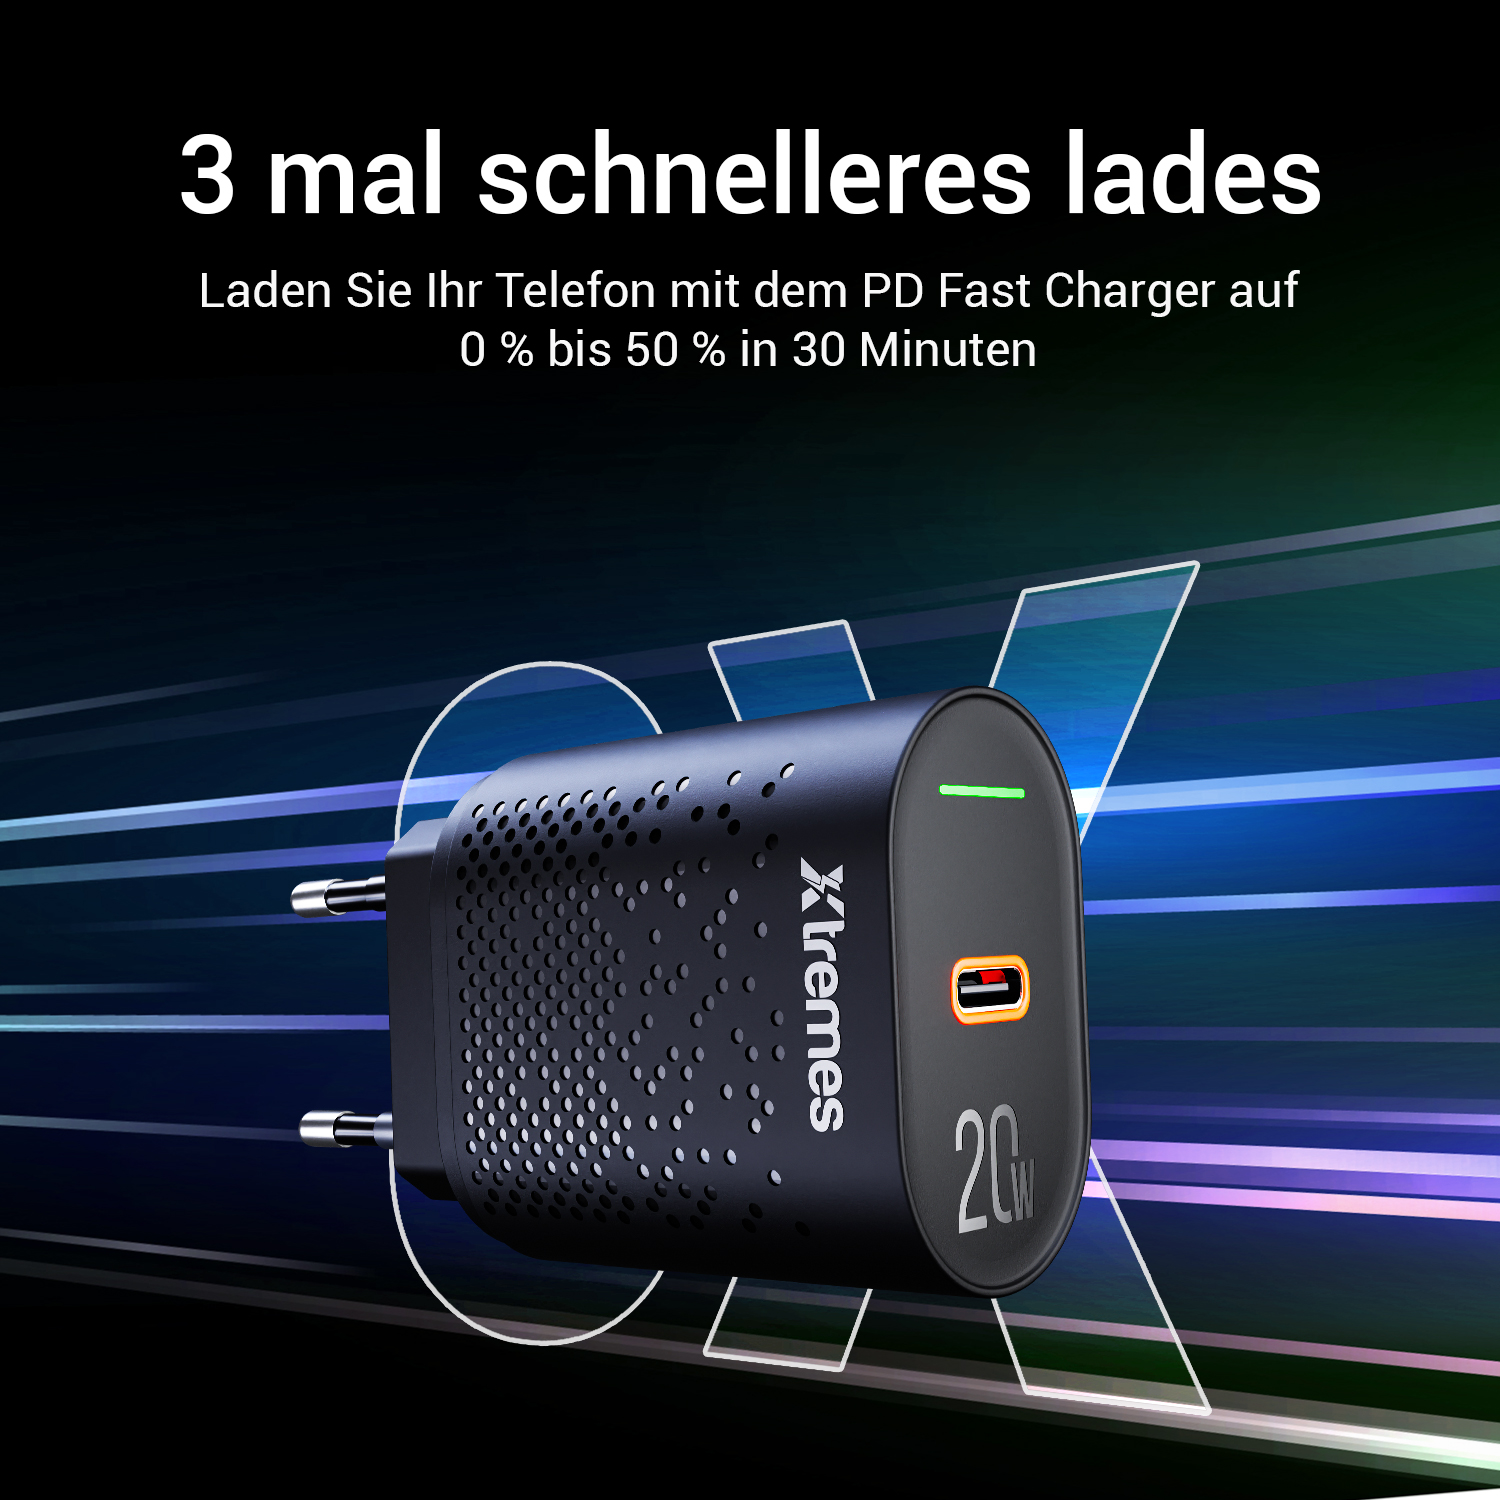 XTREMES Fast Charger Kabel) / / Apple Ultra/ PD Airpods, Galaxy Watch XS S21 SE MAX, 12 (GC09) Max /Ipads, Samsung 20W Mini / Max, Xiaomi (ohne uvm., / Ladegerät-Adapter Pro / 12/12 /S21/ Pro/ Pro Pro Huawei XS iPhone S20 / 14 Tabs MAX/ Plus; / S10e, / S10 Pro / 14/14 / / Pro/ Max / 13/13 /11/11 / 11 12 15/15 15 S20 Pro XR Pro/ White X Pro 3.0 FE/ S22 13 Pro / 8/8 S21+ Max